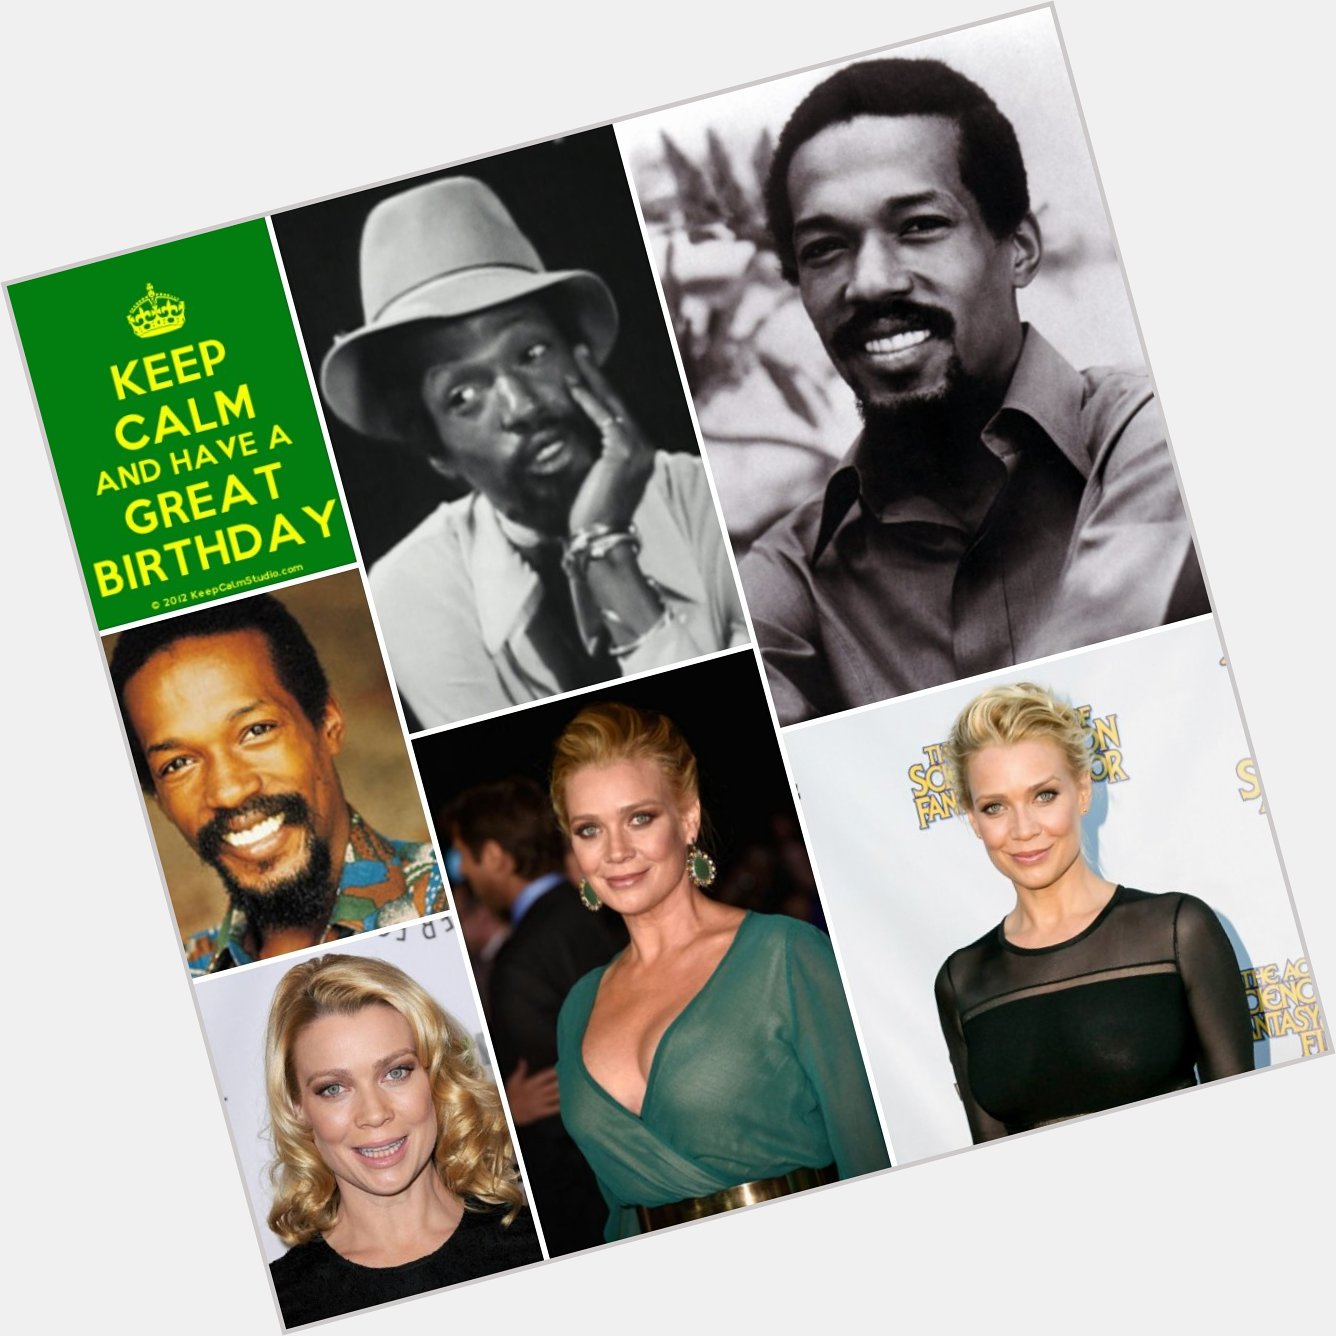 Happy Birthday, Eddie Kendricks(RIP) and Laurie Holden. Love You...Party All Night...Don\t Get A Hangover...  